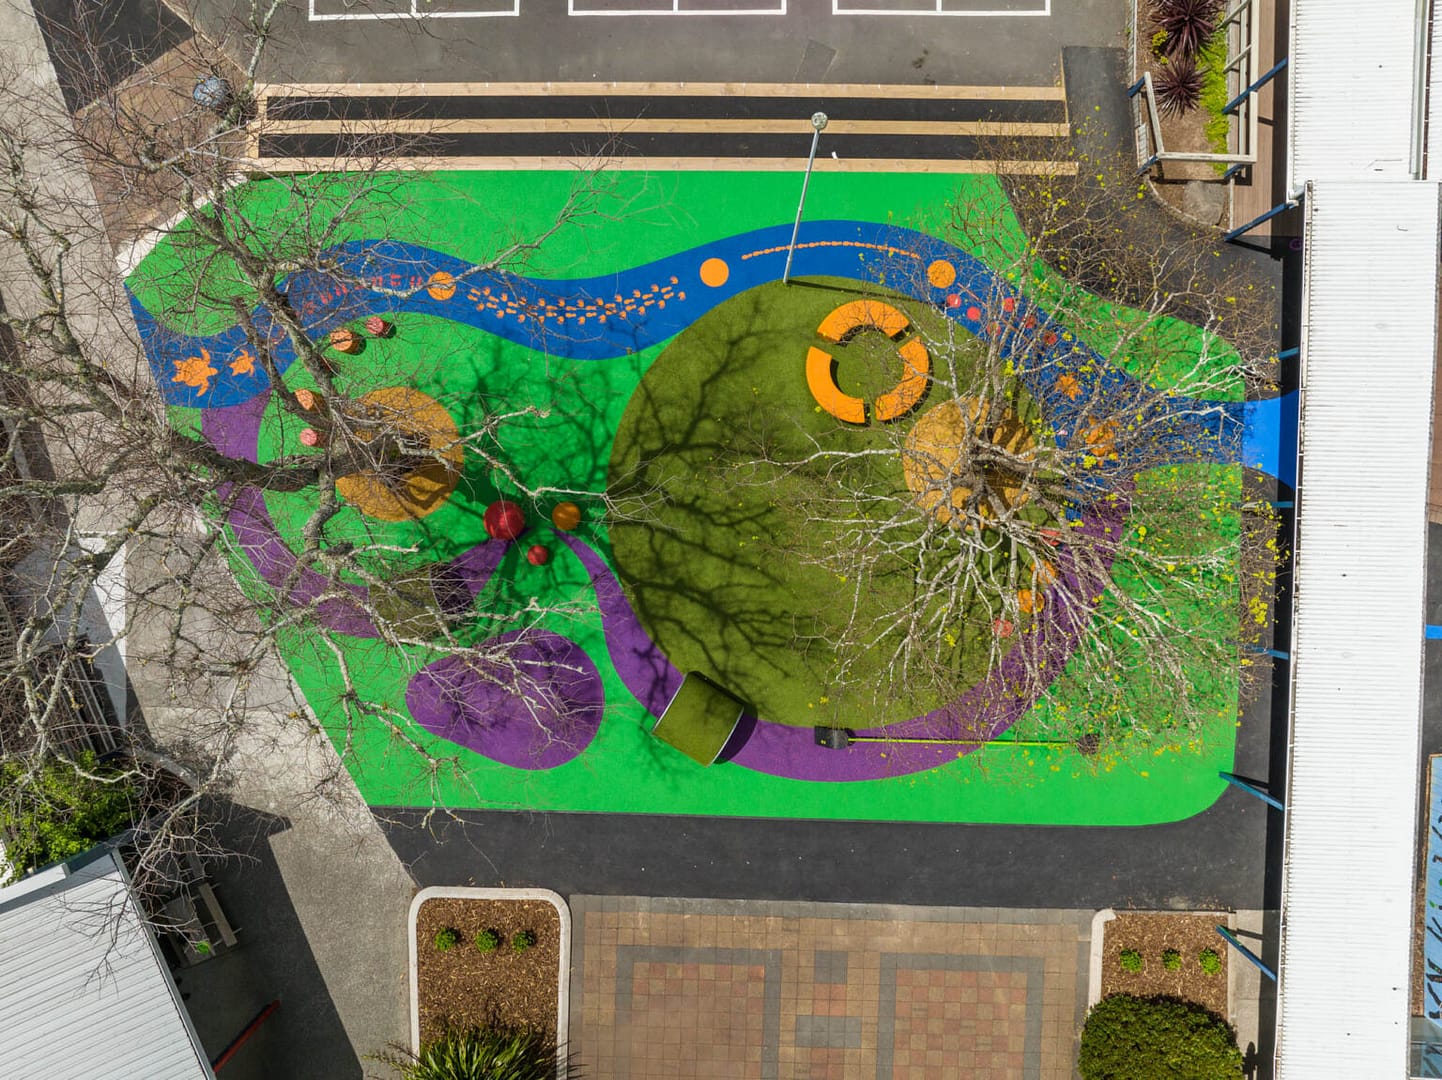 Top view of a school playground